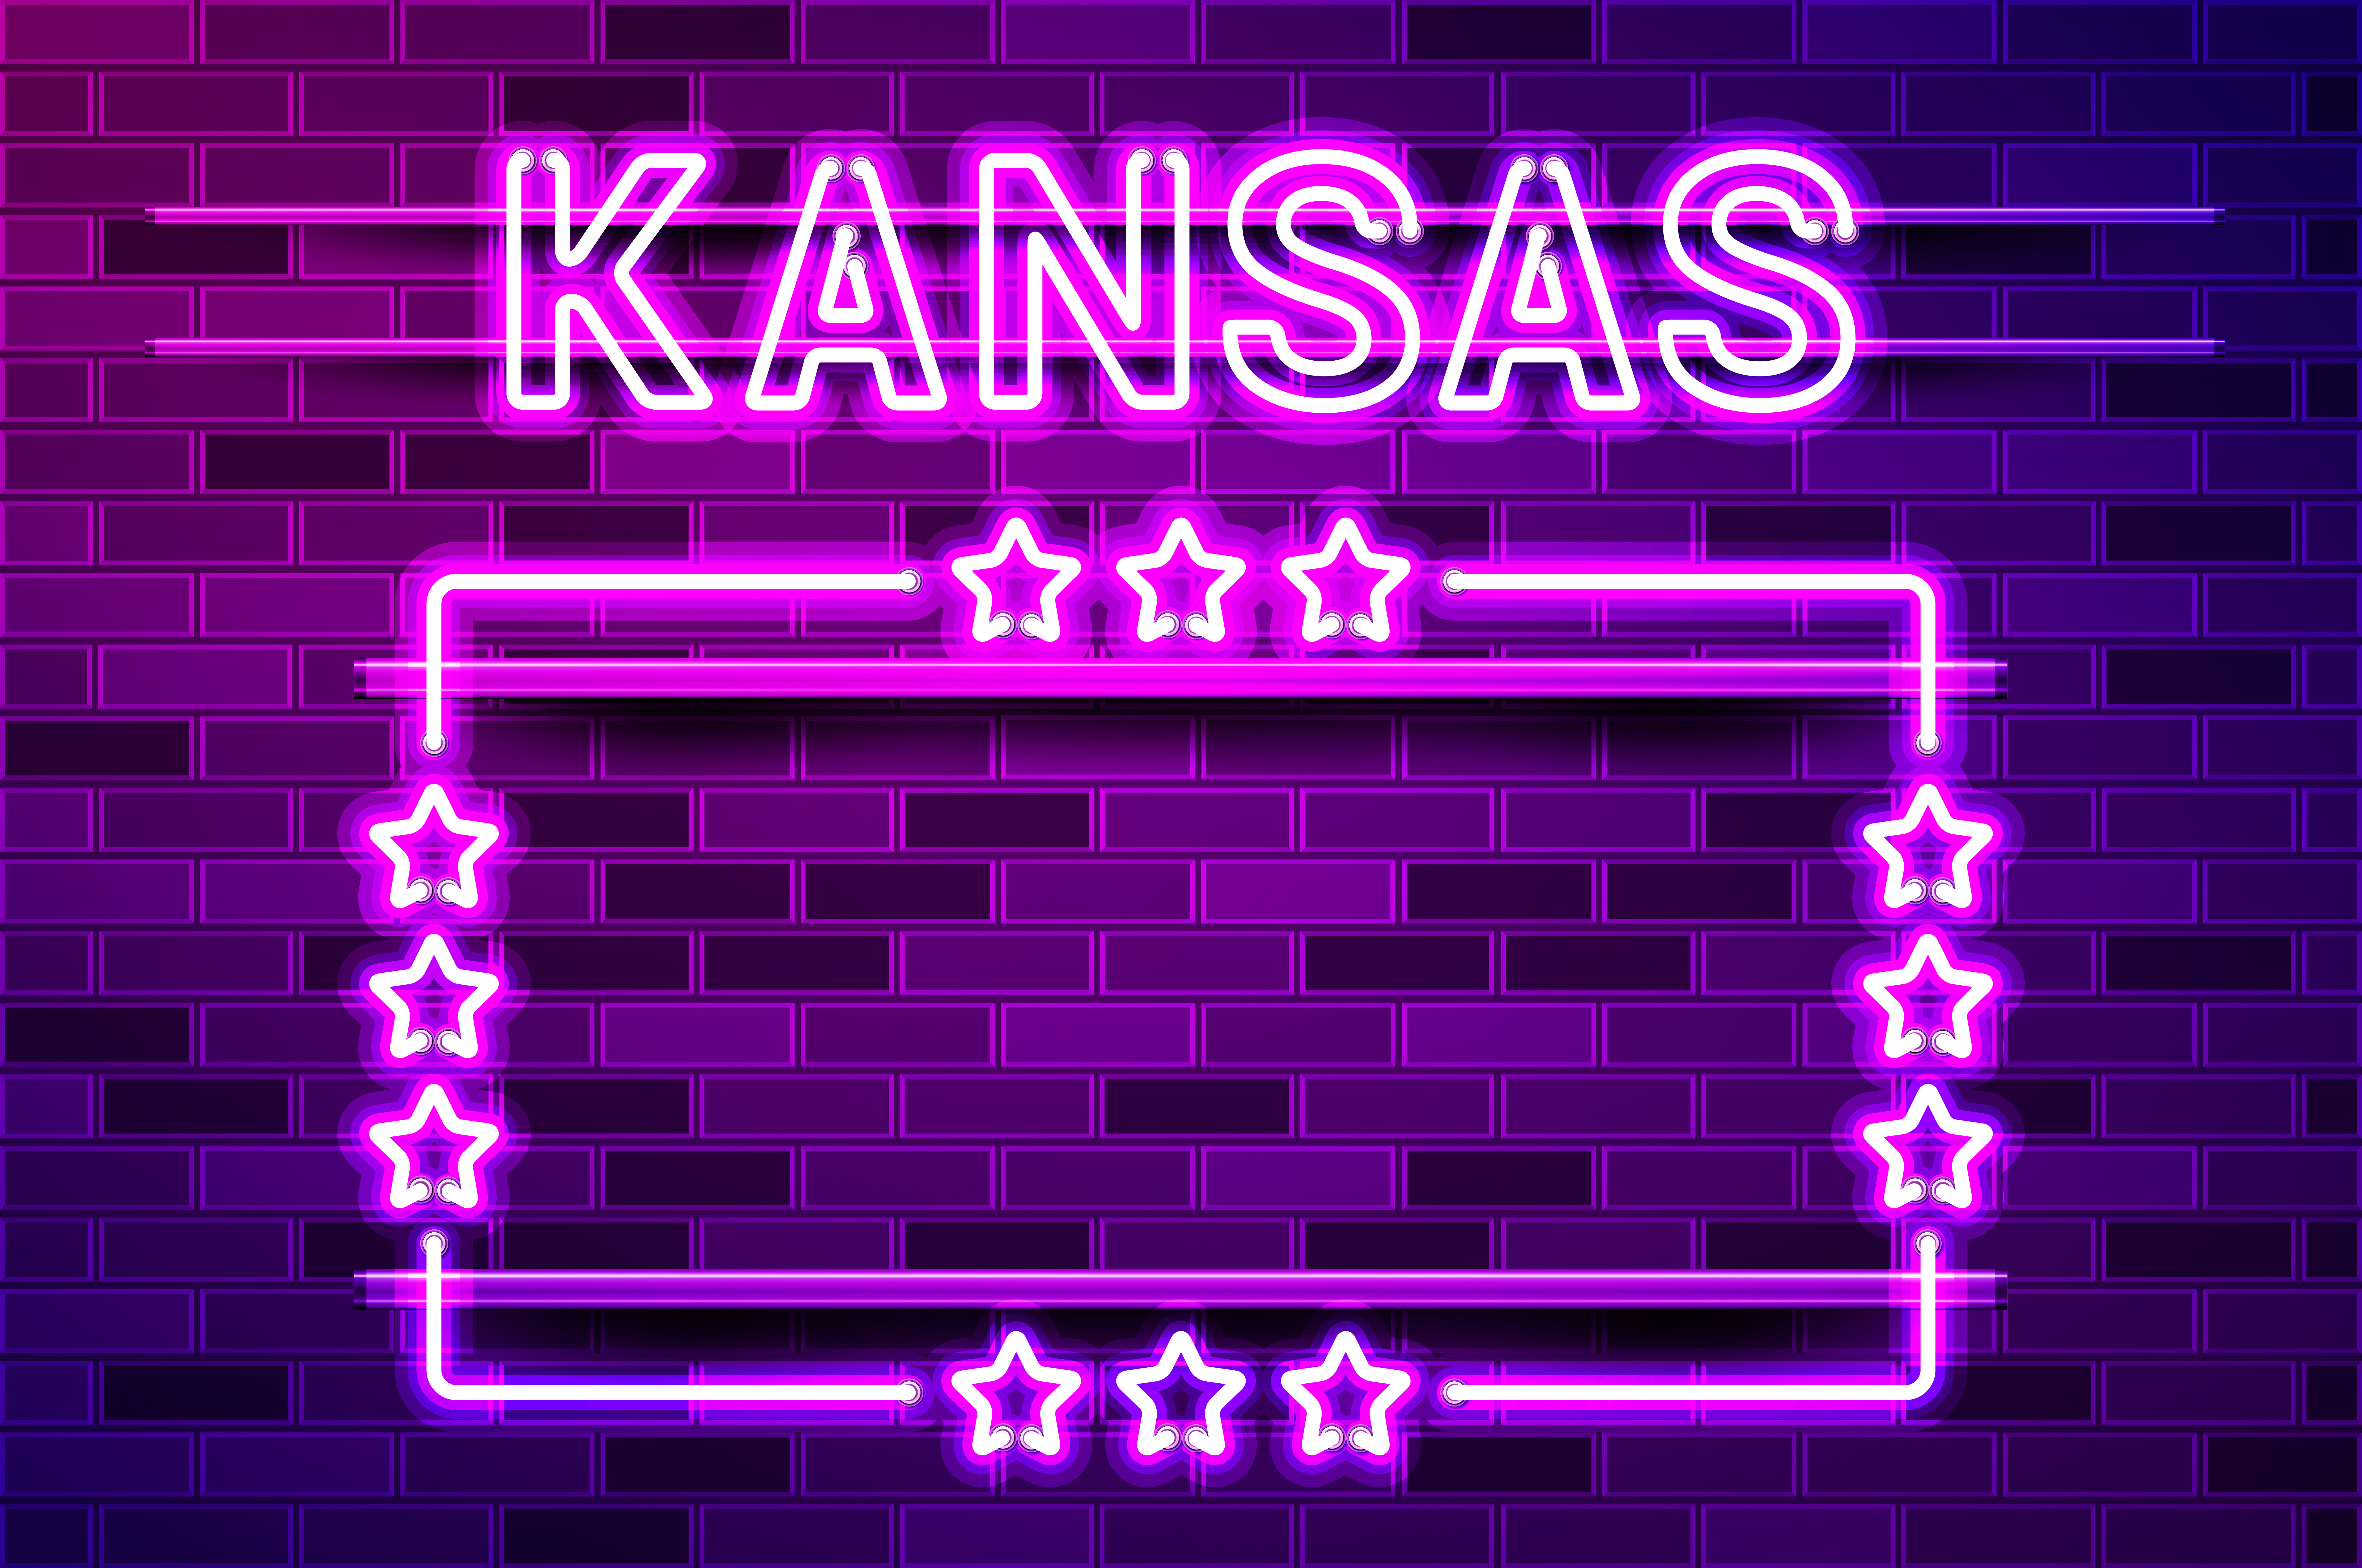 Kansas US State glowing purple neon lettering and a rectangular frame with stars. Realistic vector illustration. Purple brick wall, violet glow, metal holders.. Kansas US State glowing purple neon lettering and a rectangular frame with stars